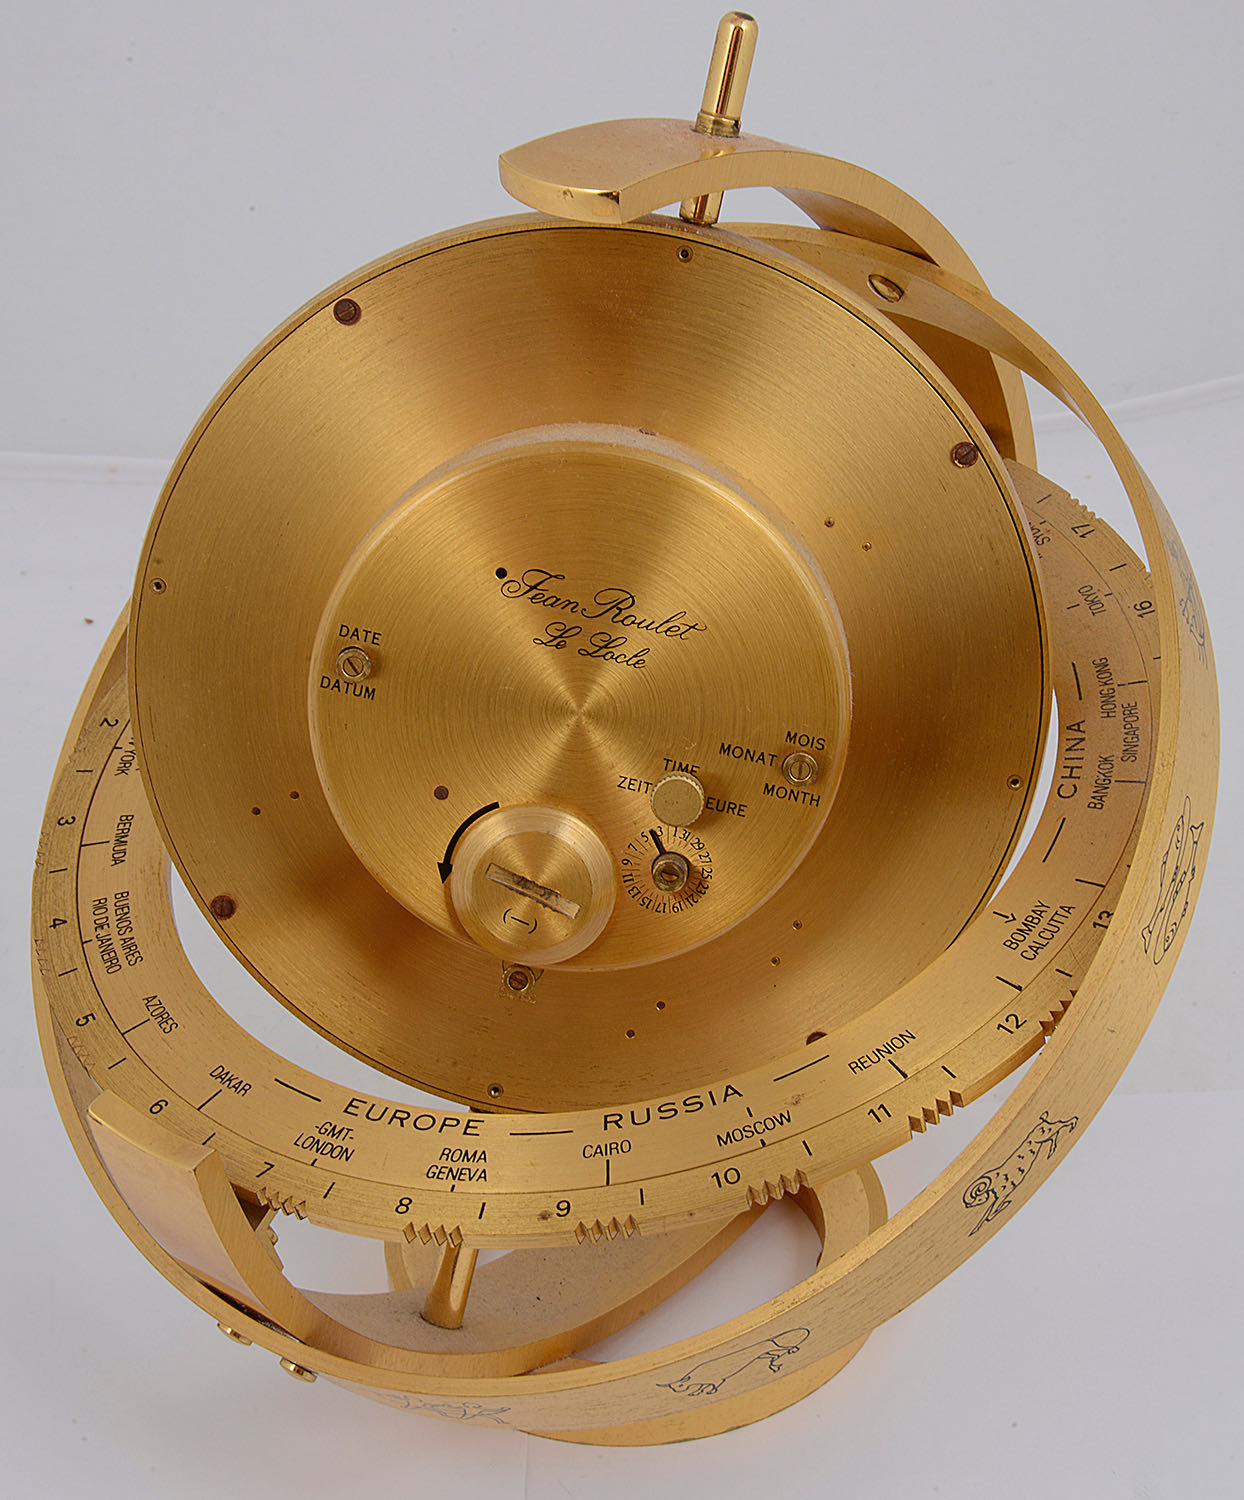 A modern Jean Roulet Le Locle world time zone desk clock - Image 2 of 3